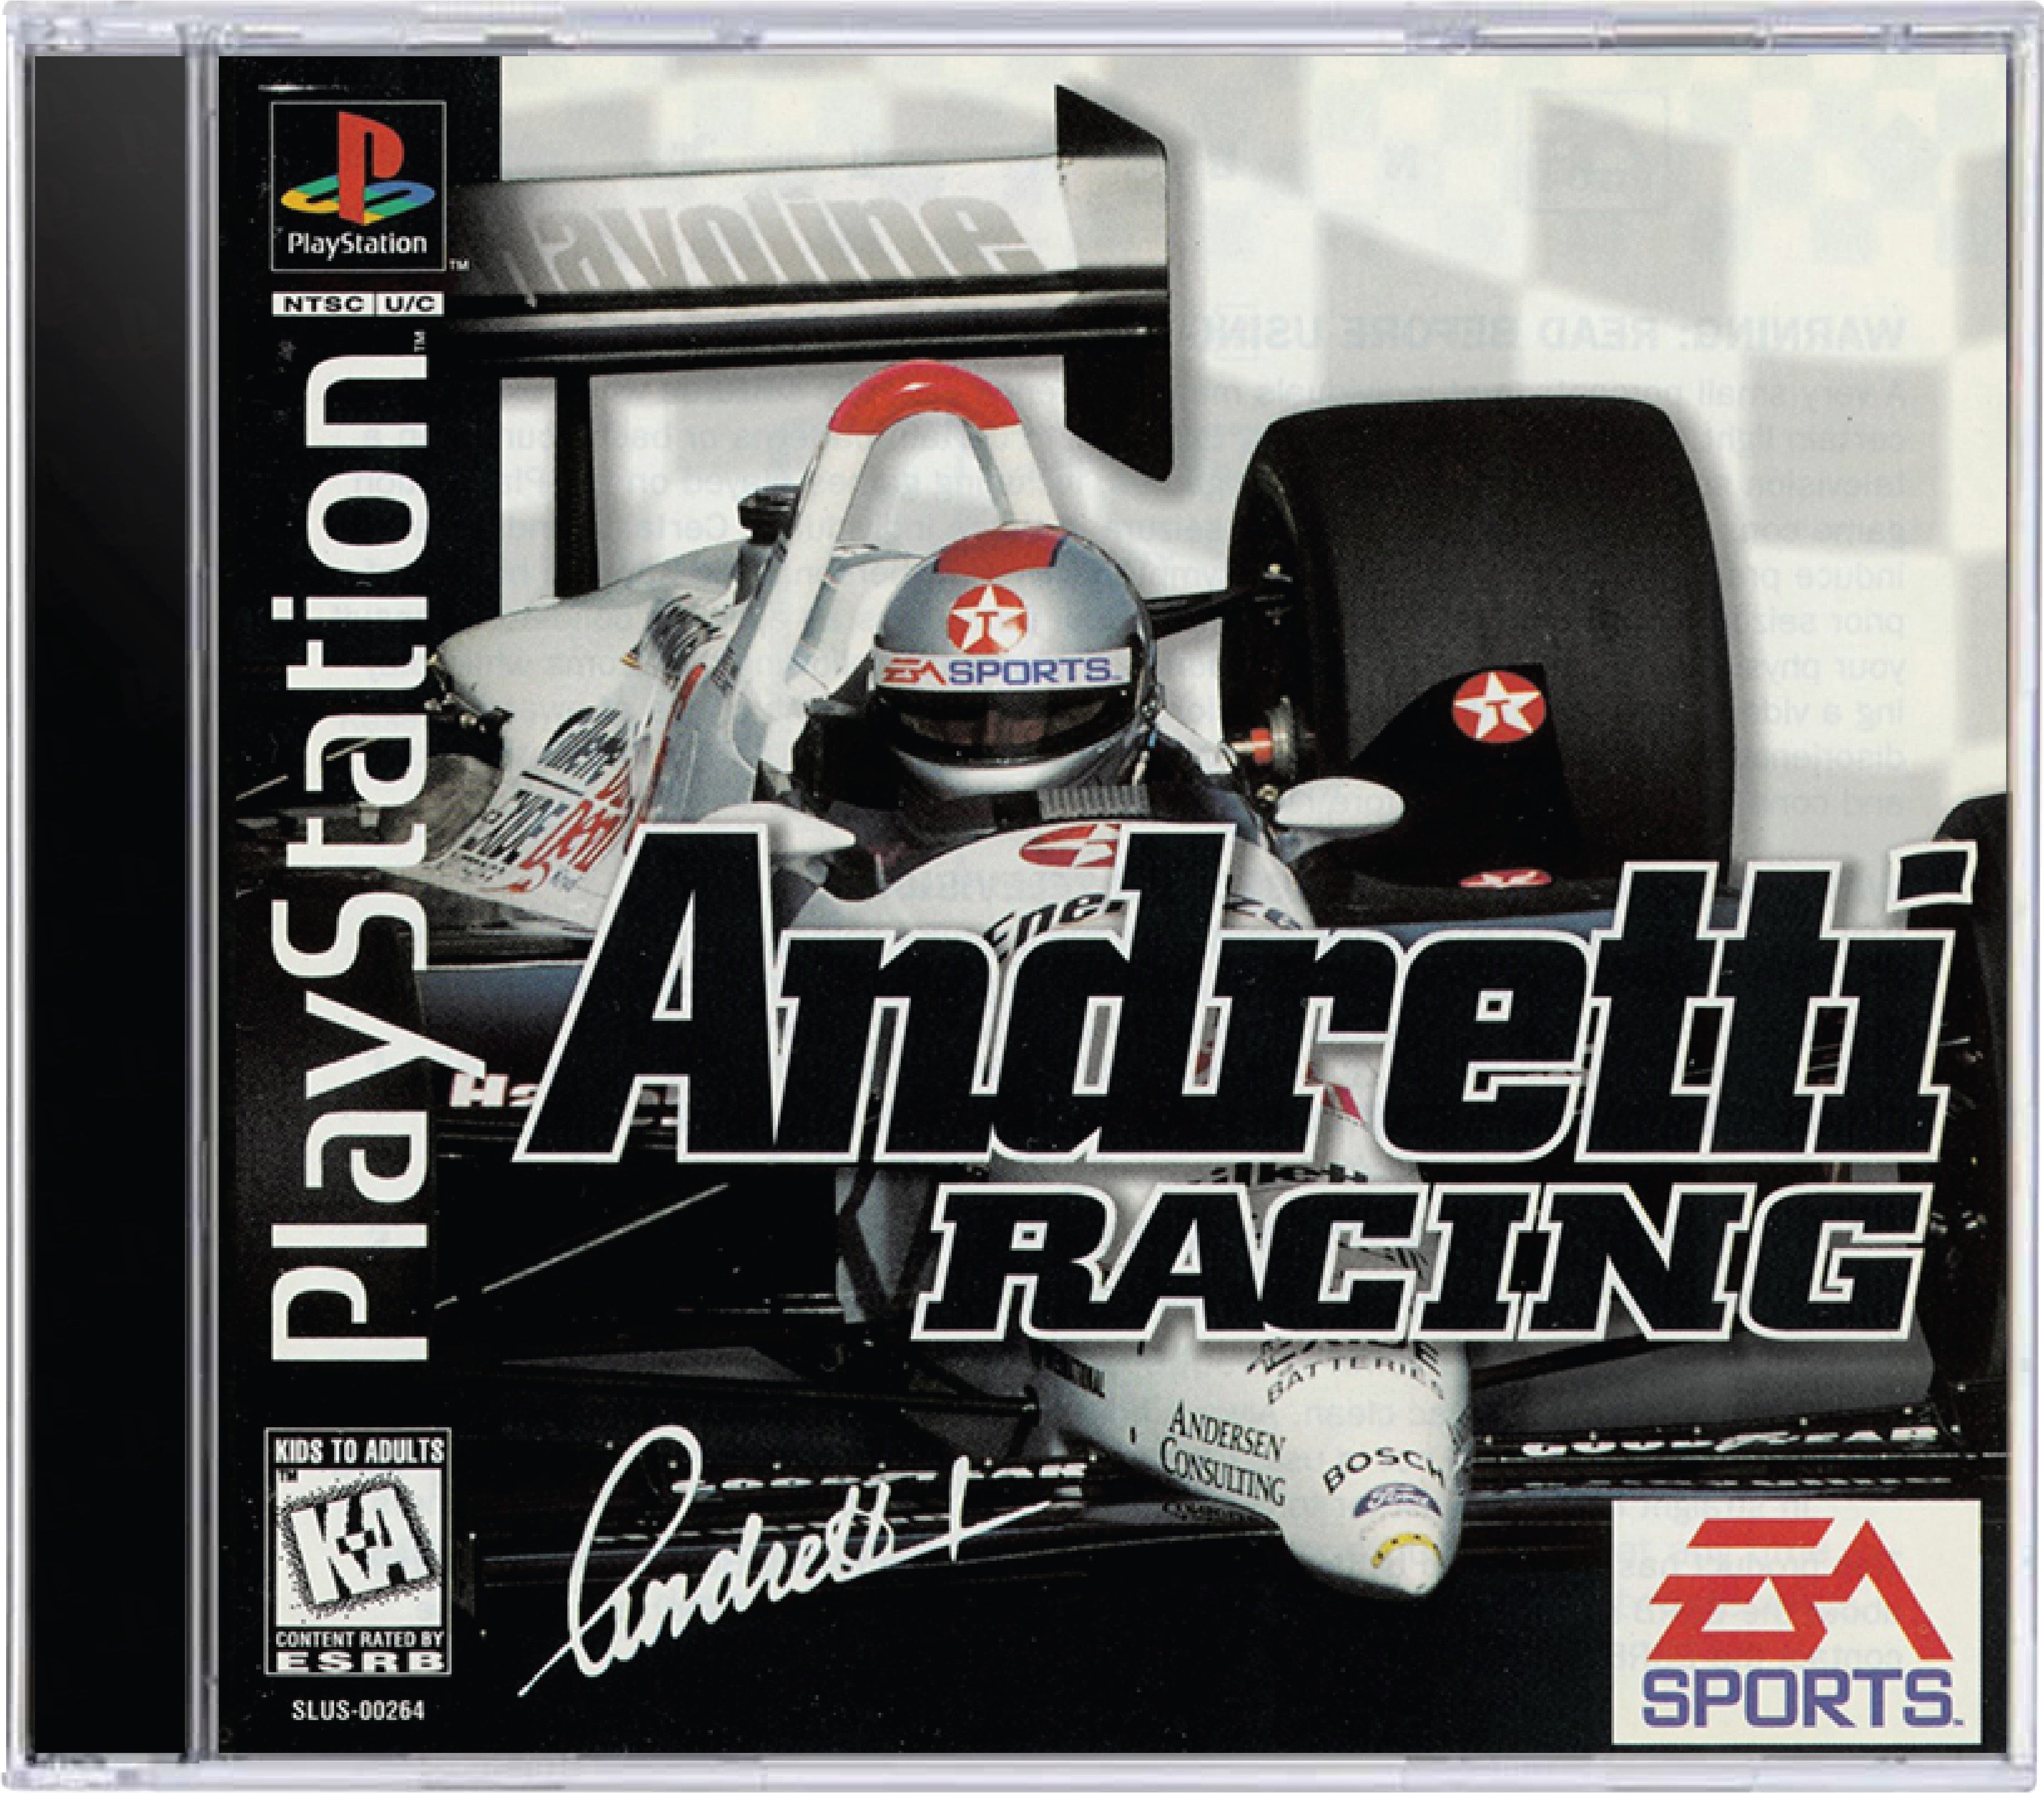 Andretti Racing Cover Art and Product Photo